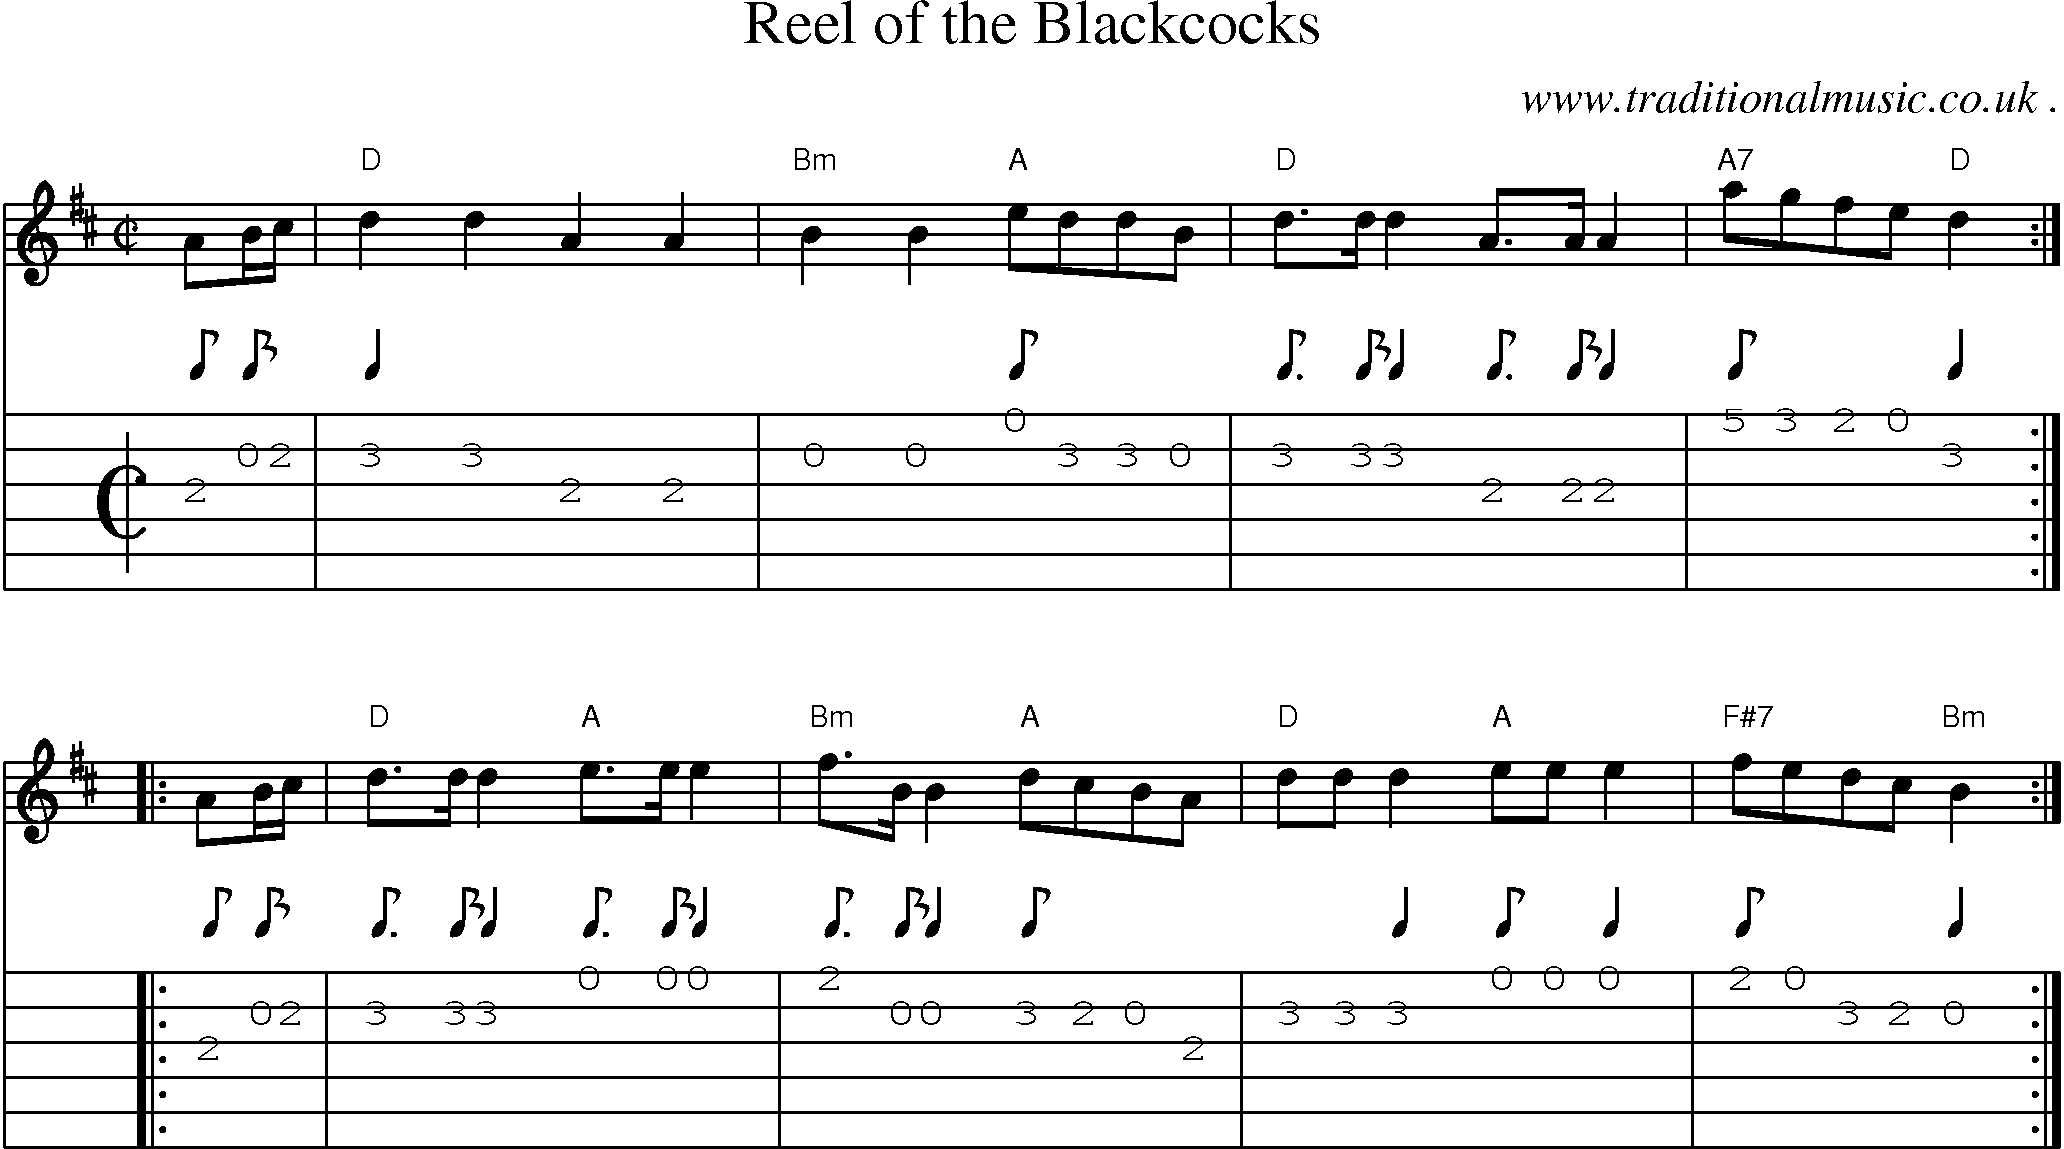 Sheet-music  score, Chords and Guitar Tabs for Reel Of The Blackcocks